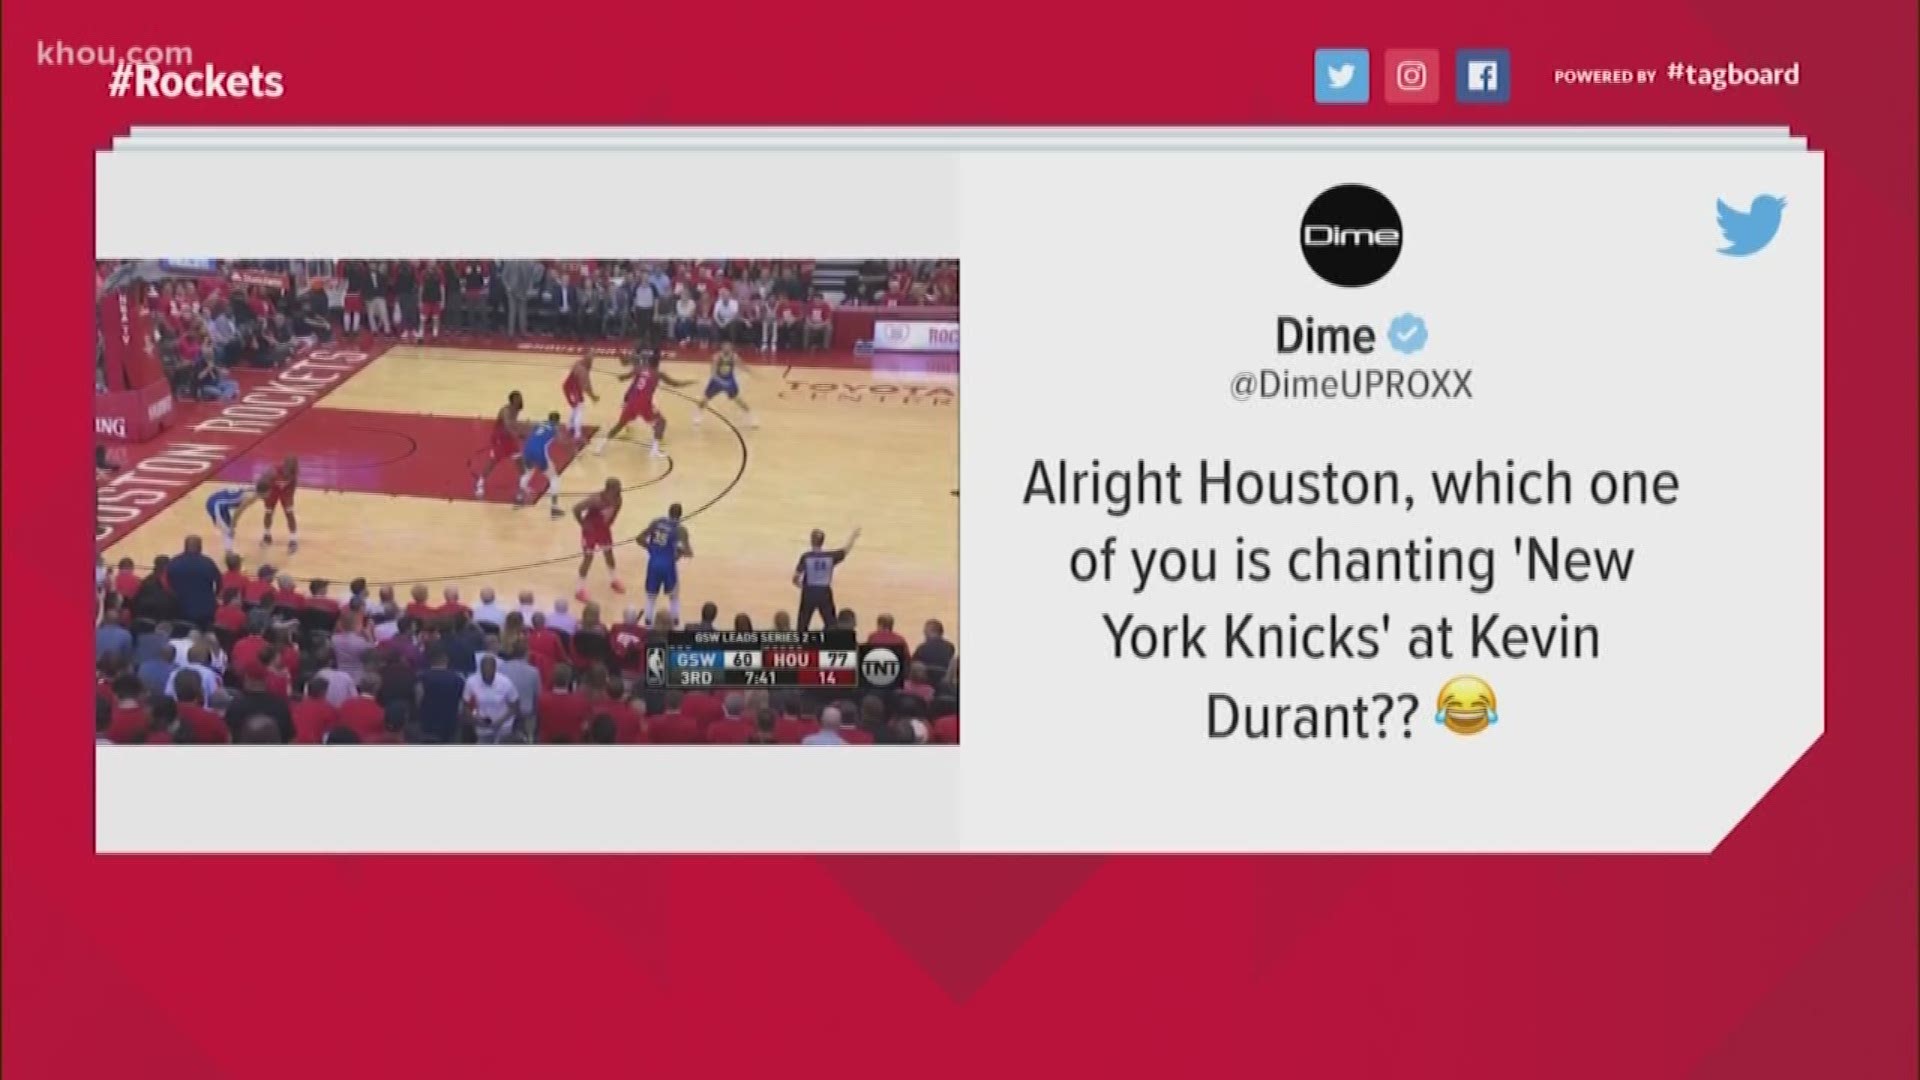 Rockets fans took to social media to celebrate the team's Game 4 victory over the Golden State Warriors laving their series tied 2-2.